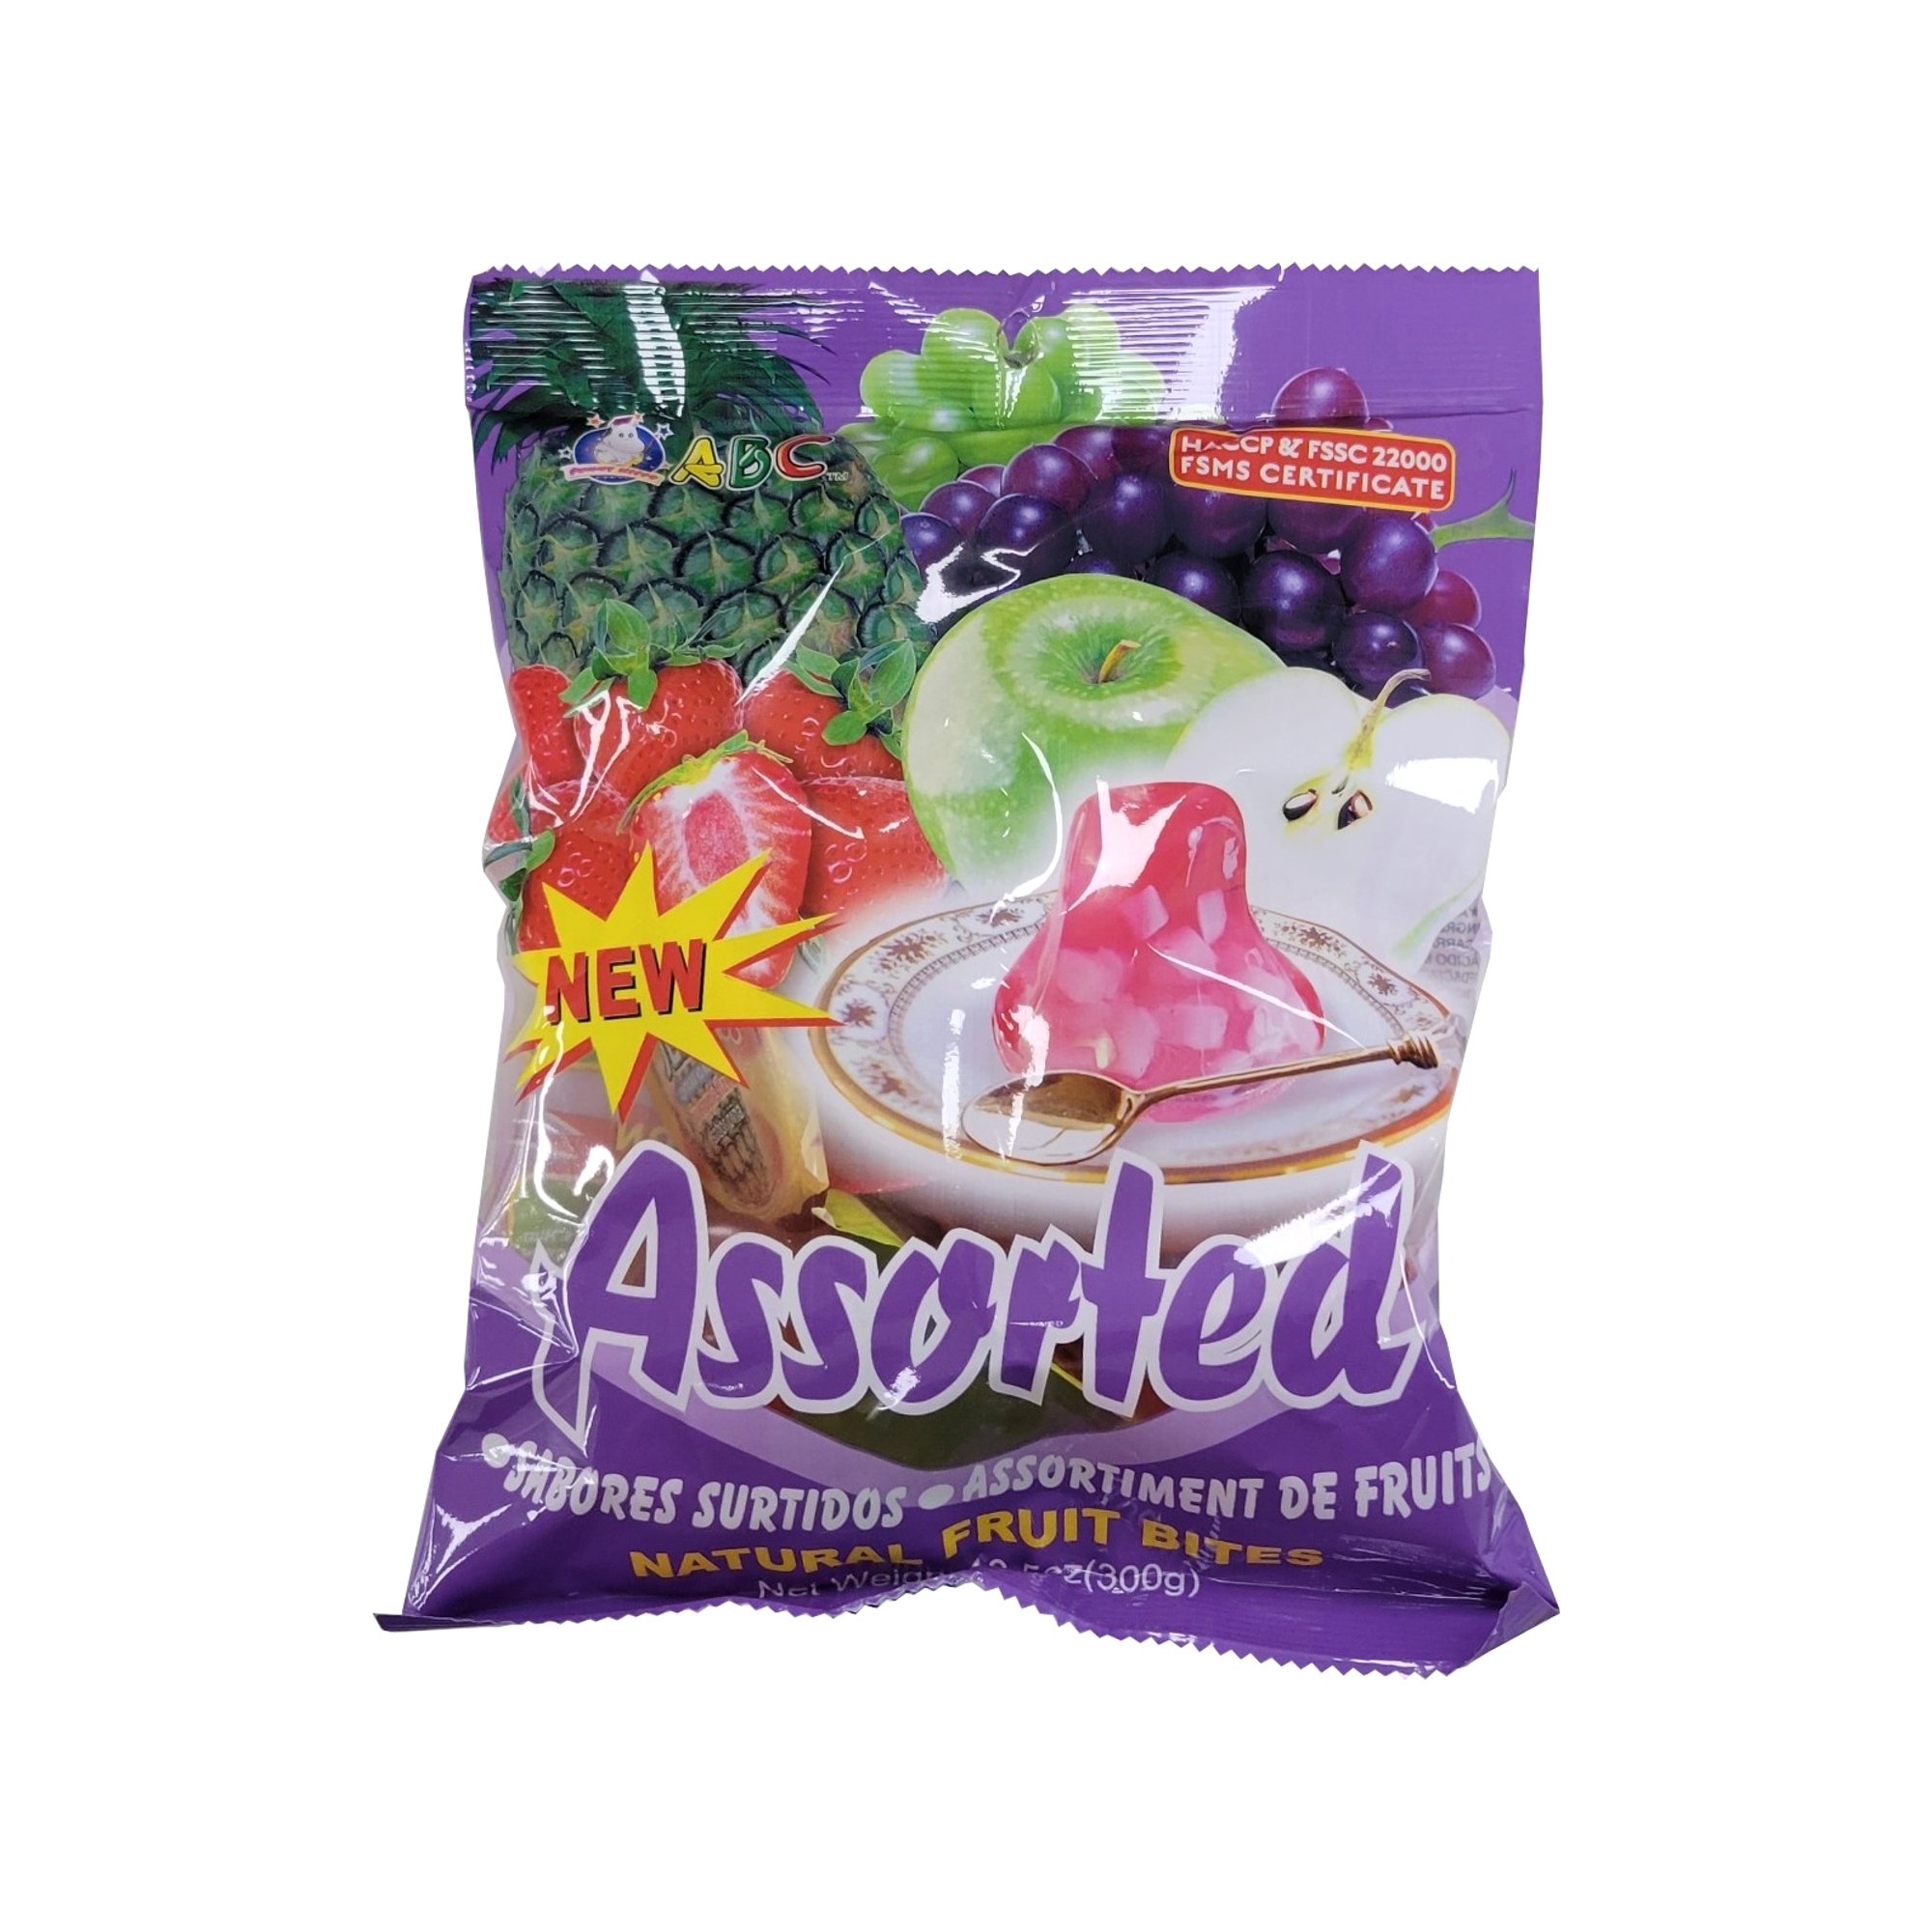 ABC ASSORTED COCONUT JELLY (bag) SN110750